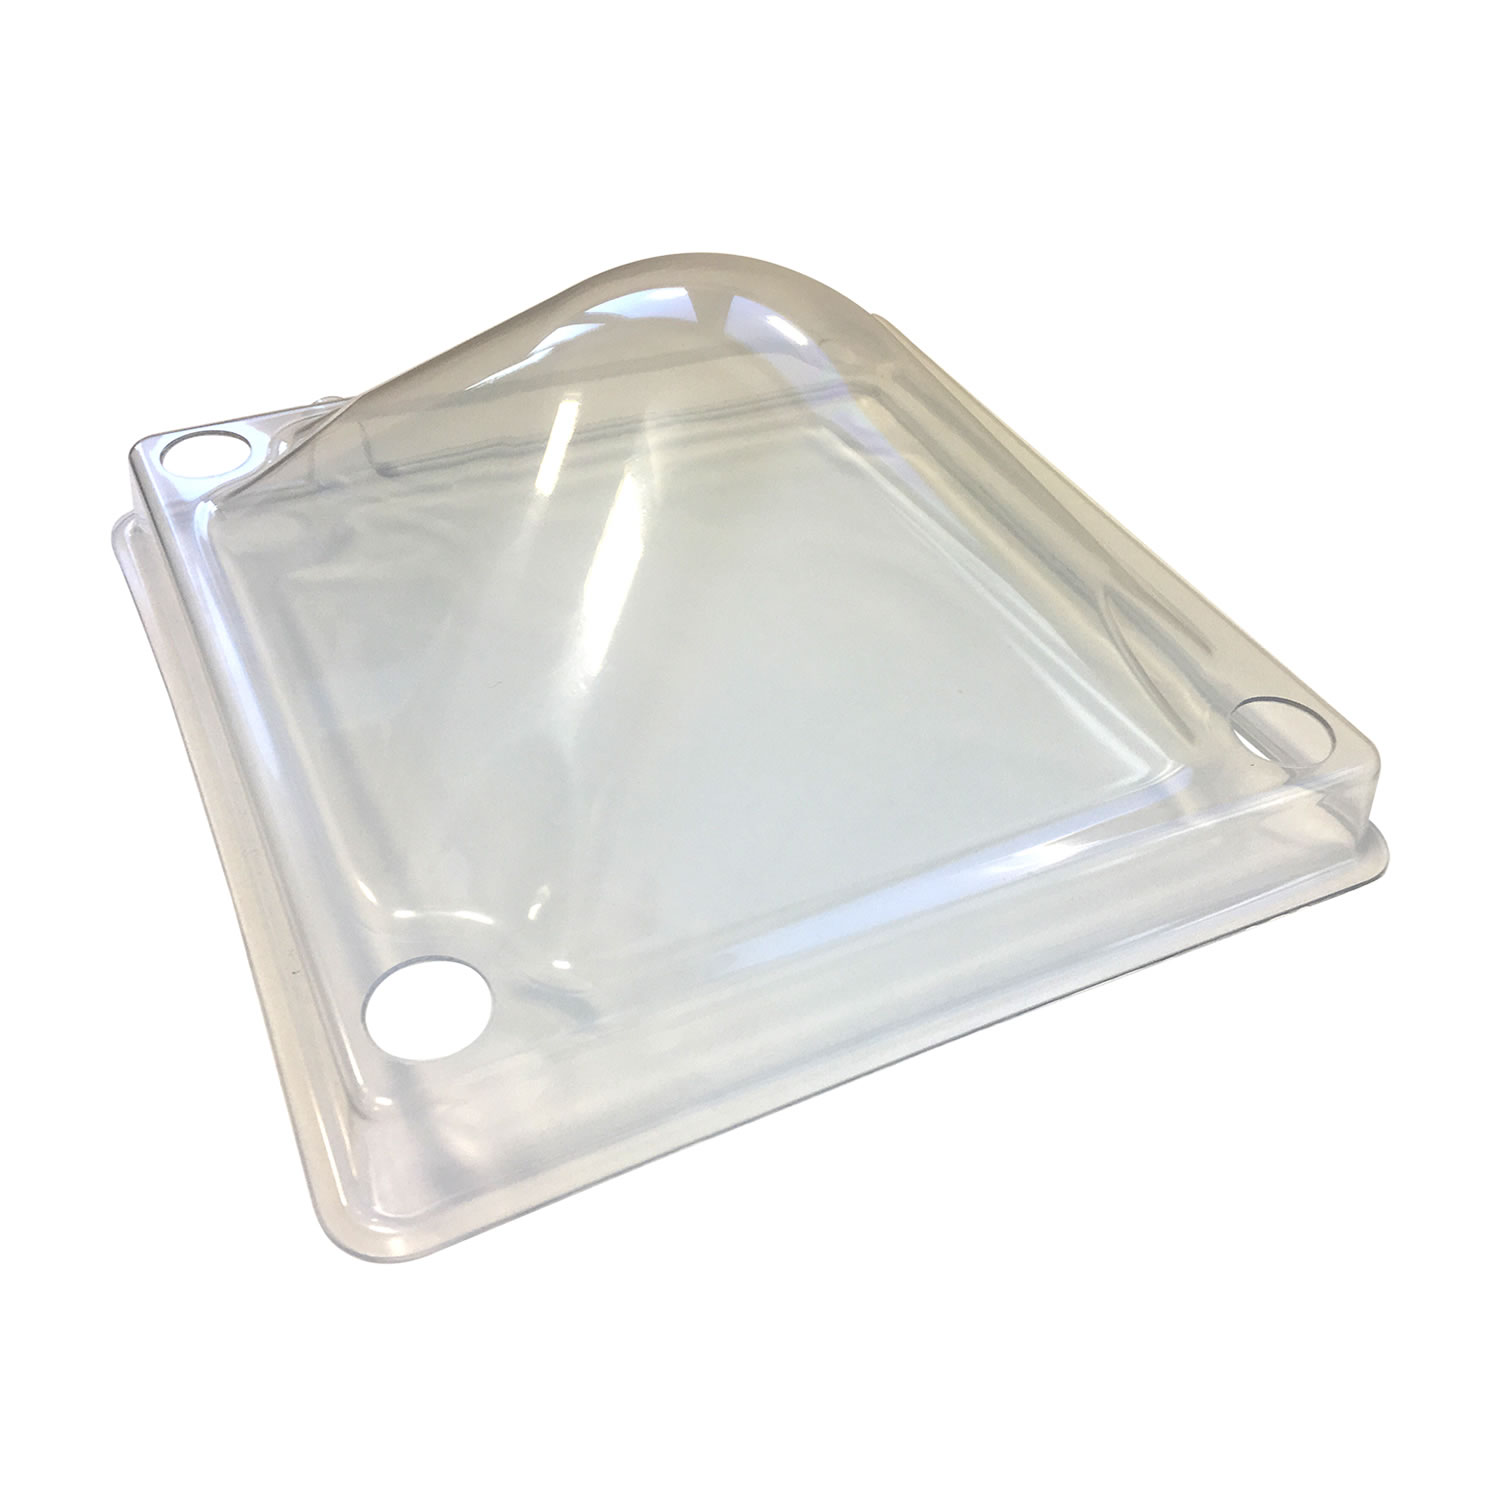 CHICKTEC COMFORT  CLEAR PLASTIC DOME COVER 40 CM  CLEAR